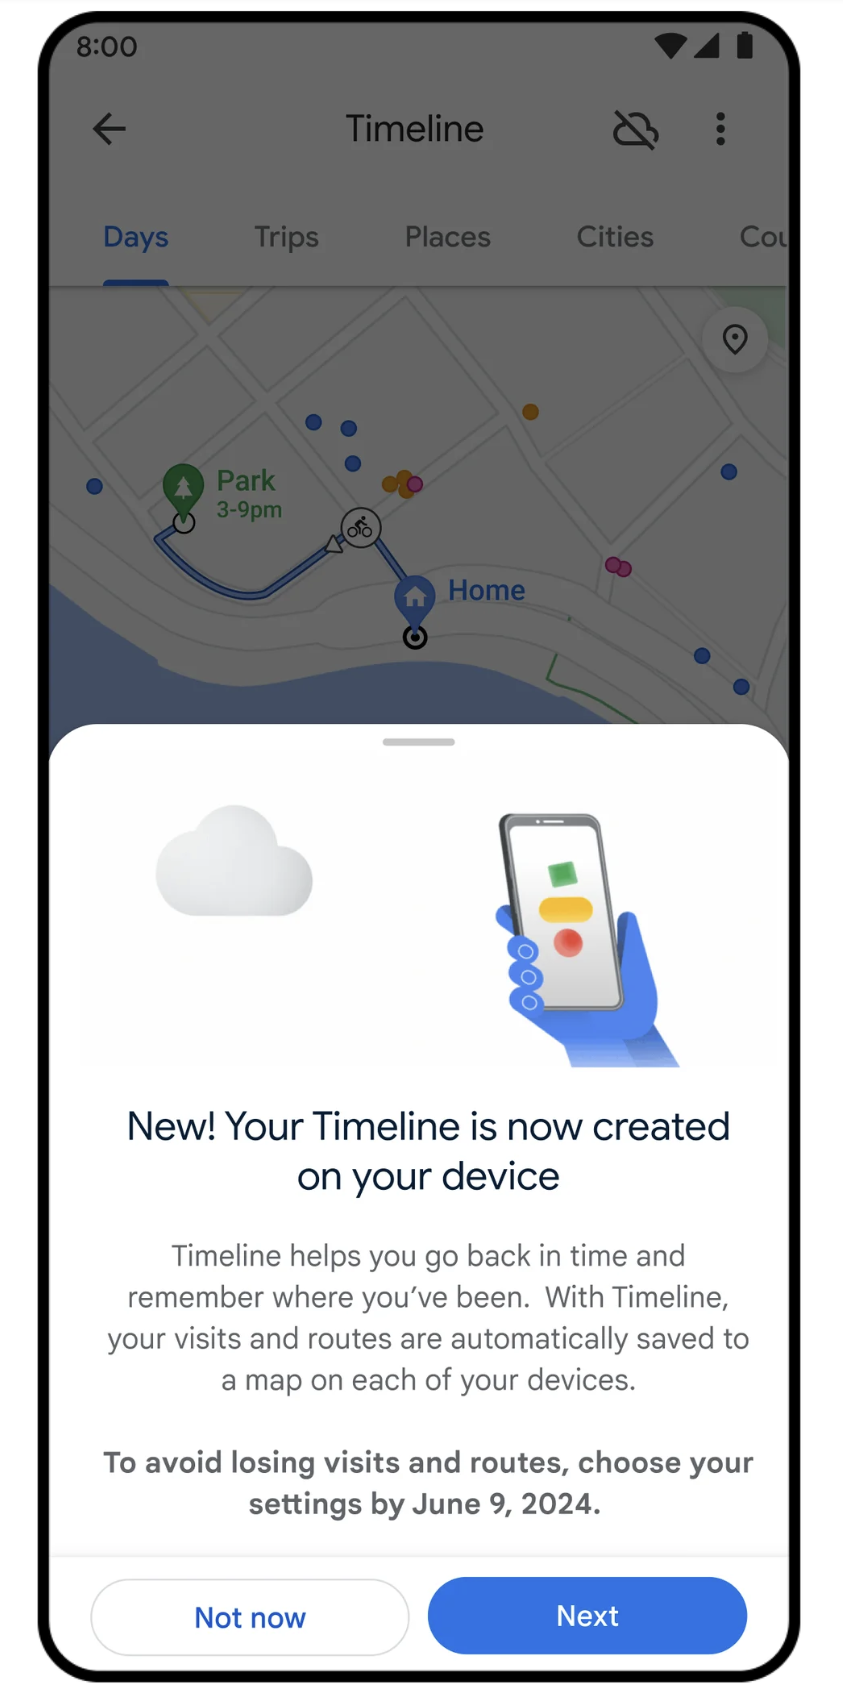 google maps timeline location history 657933af80cd0 sej - Google Maps: New Location Data Controls & Ability To Delete Visits